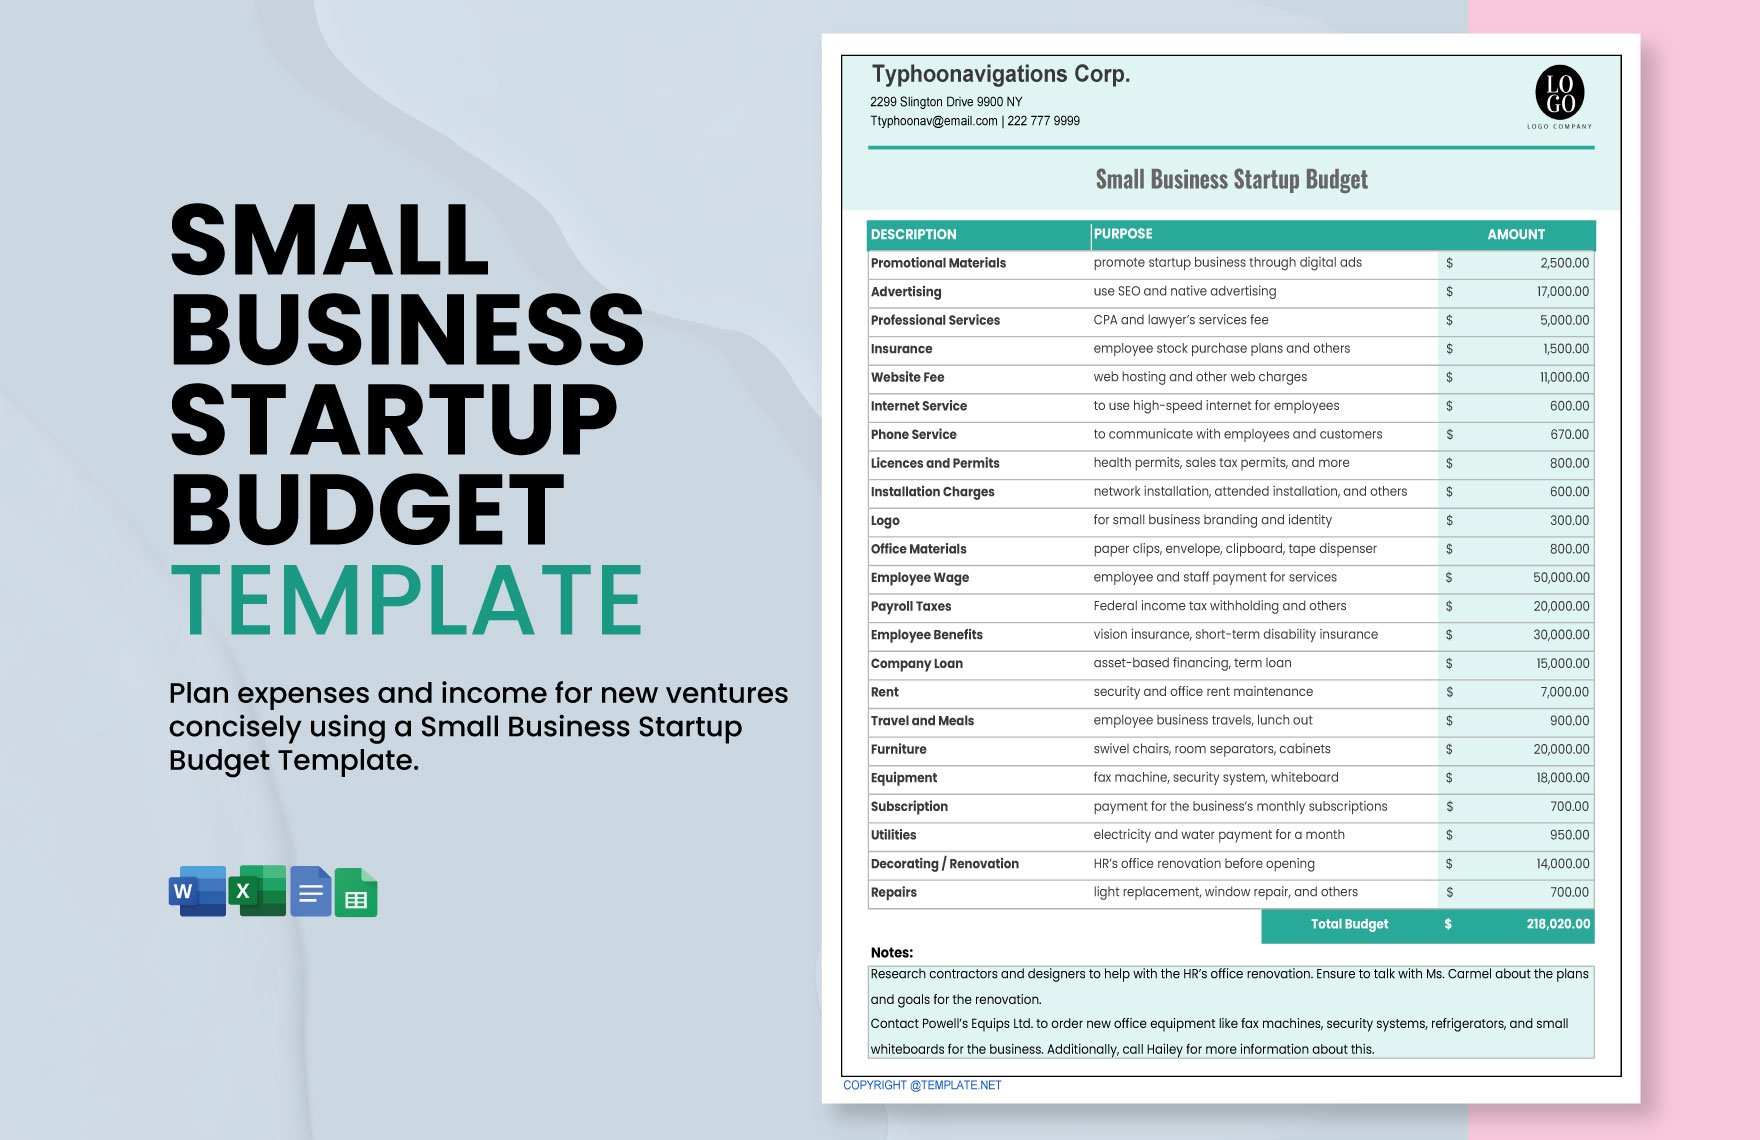 Small Business Startup Budget Template